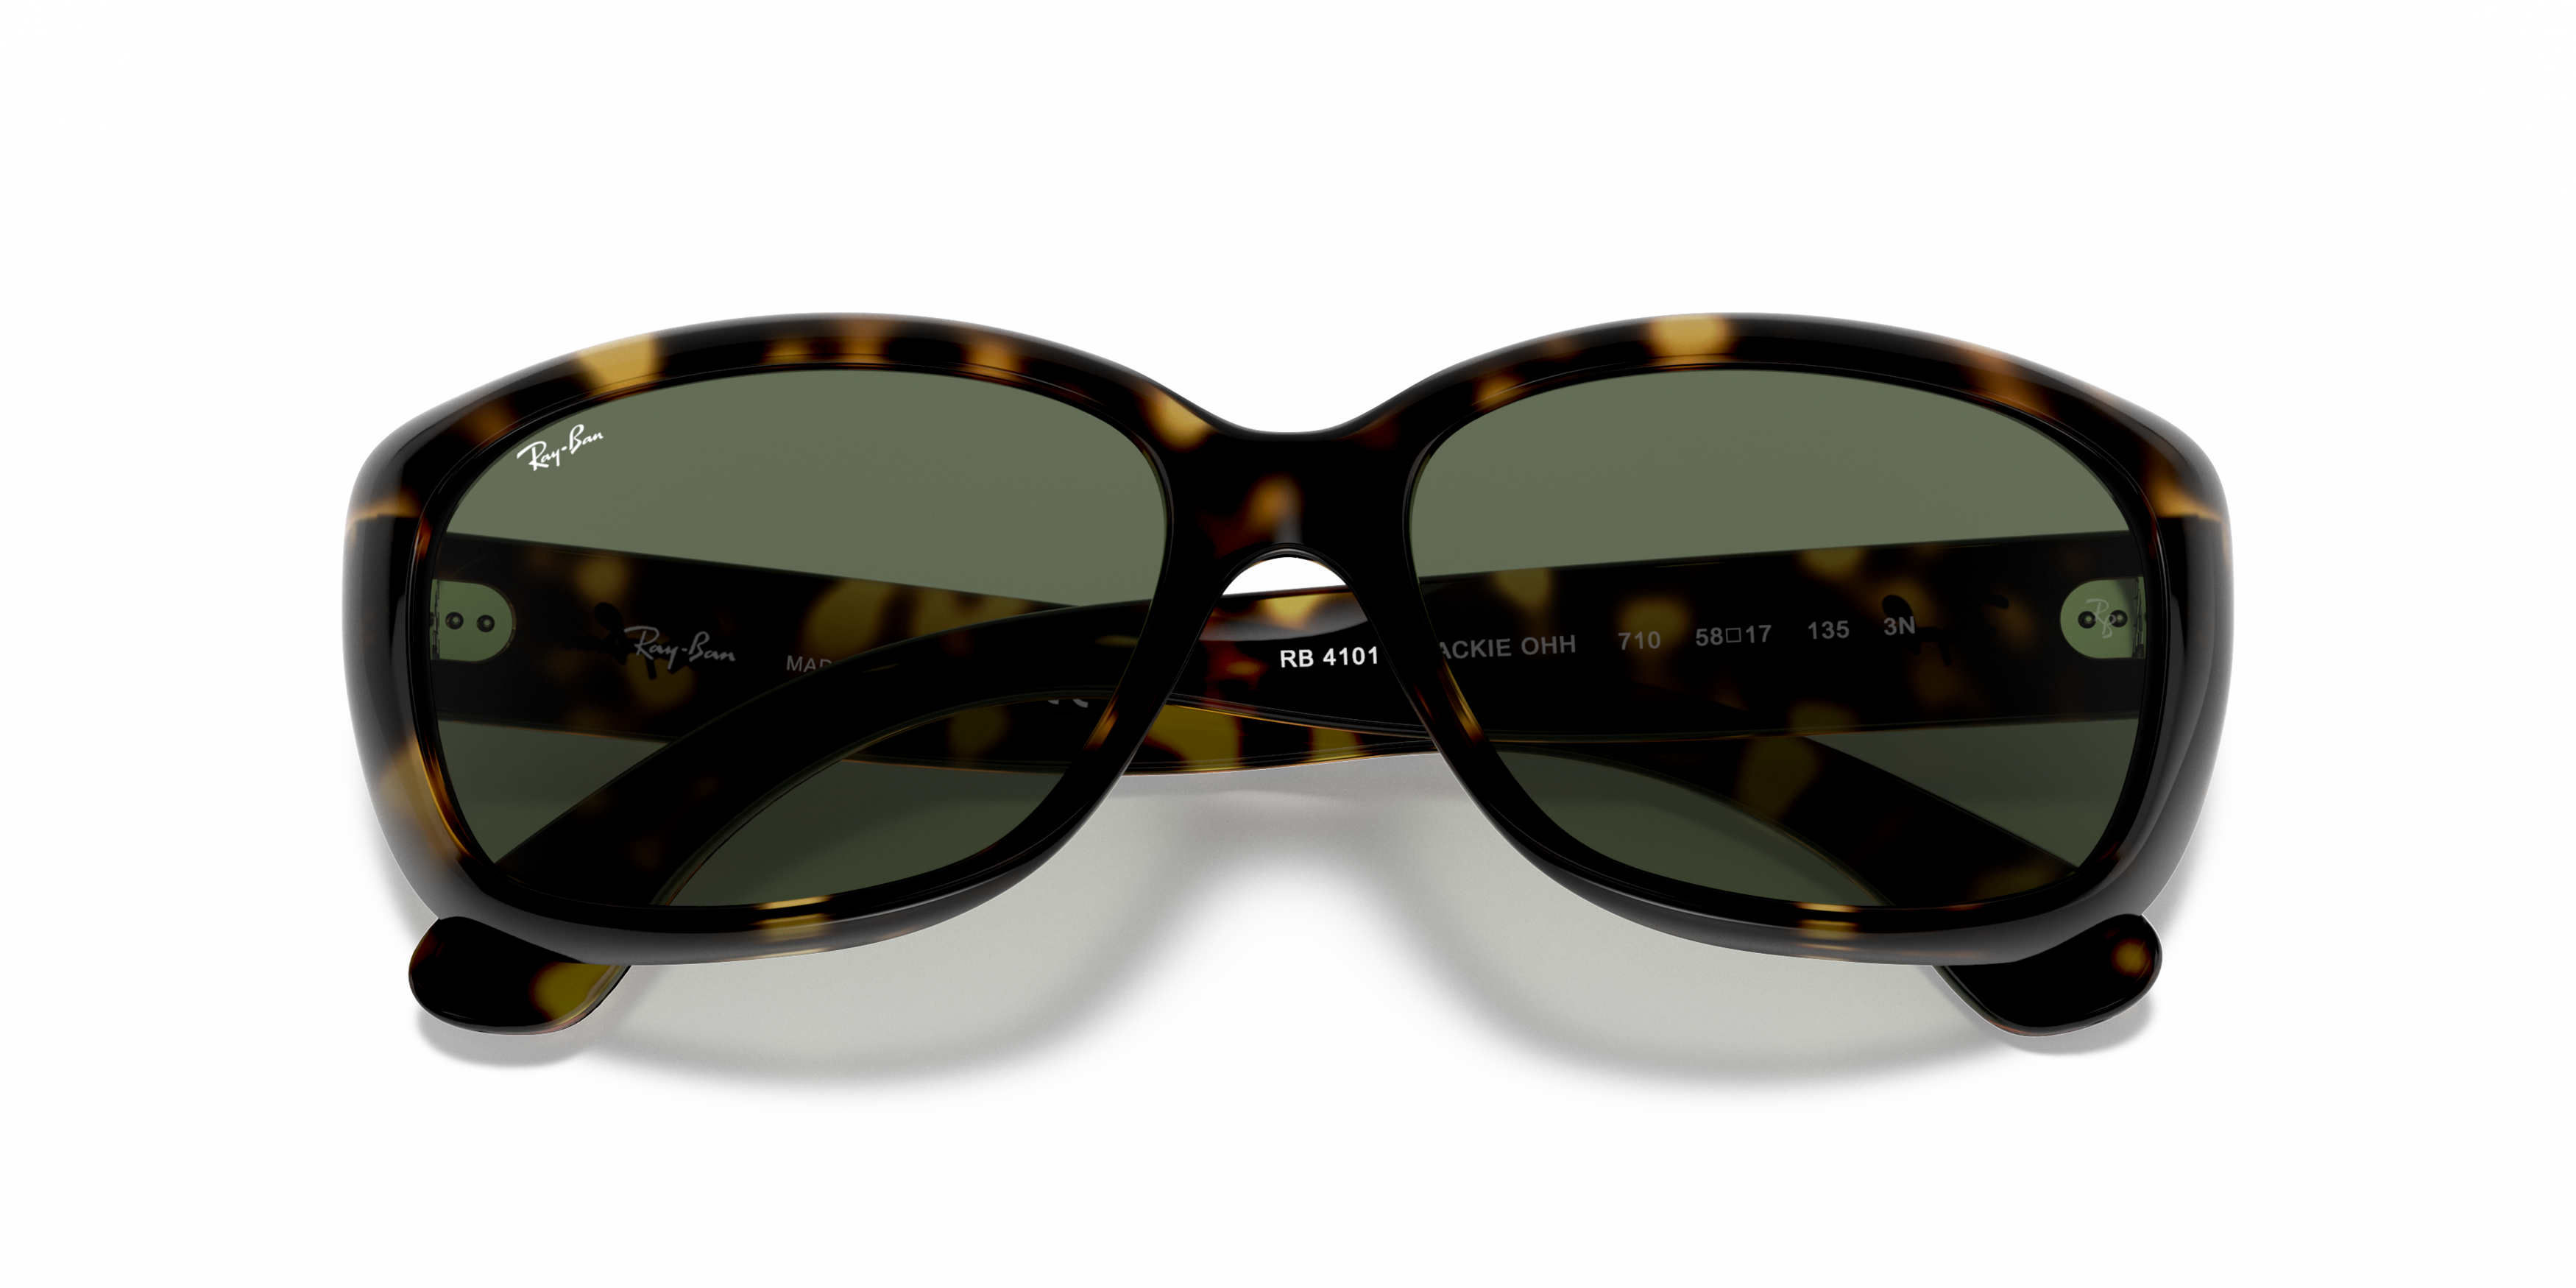 [products.image.folded] Ray-Ban JACKIE OHH 710